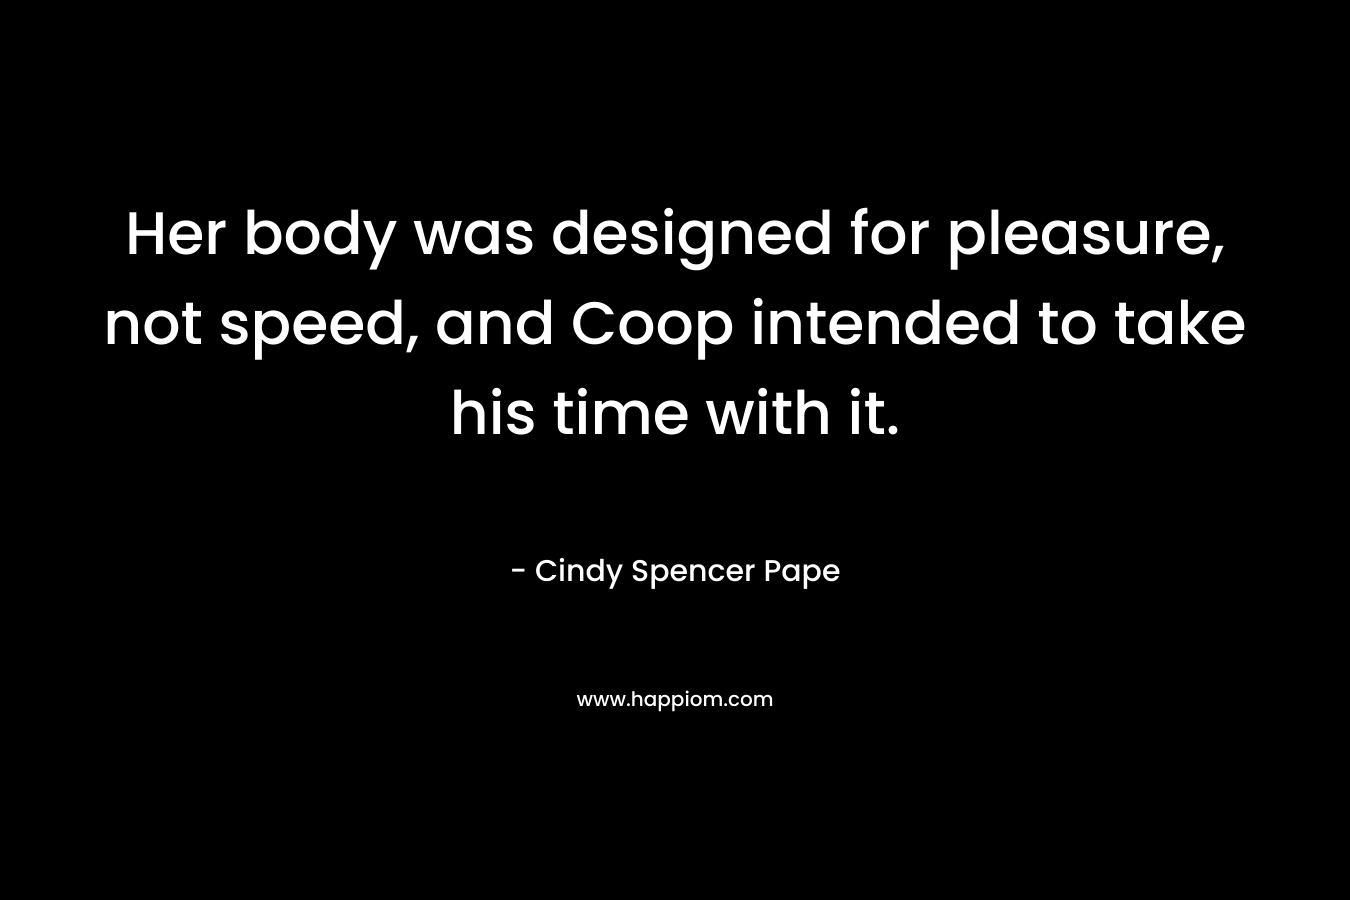 Her body was designed for pleasure, not speed, and Coop intended to take his time with it. – Cindy Spencer Pape